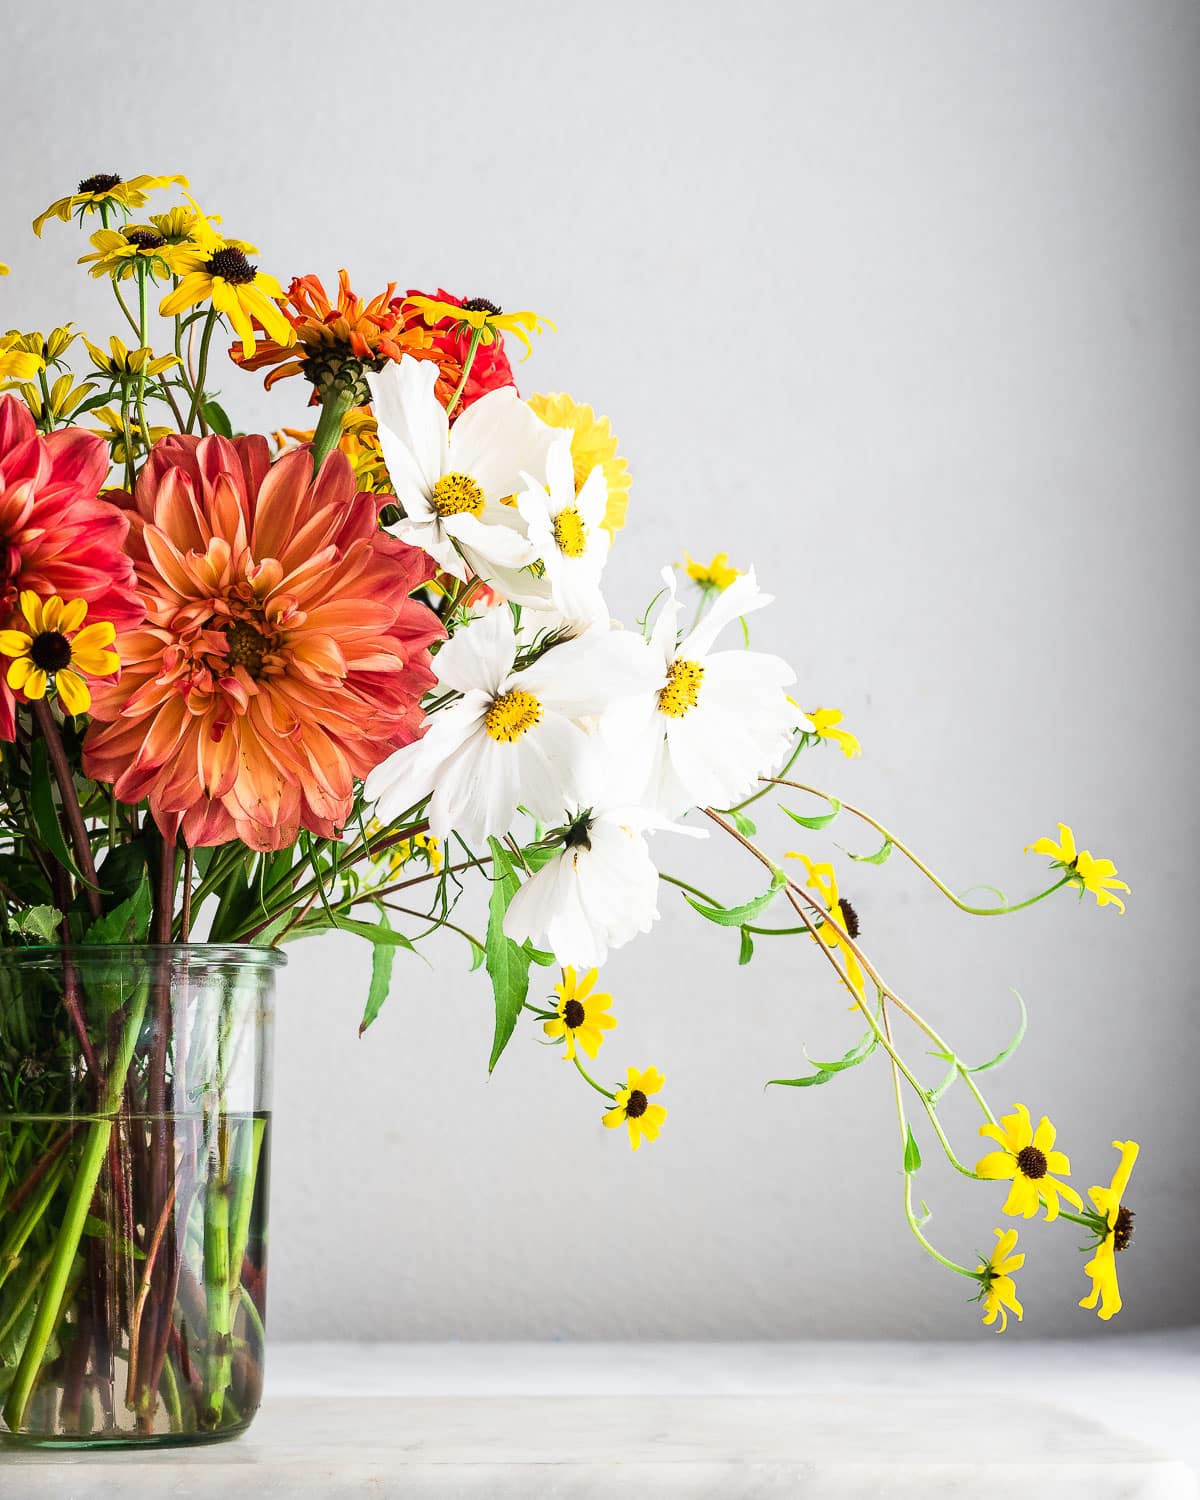 Flowers in clear vase with white background